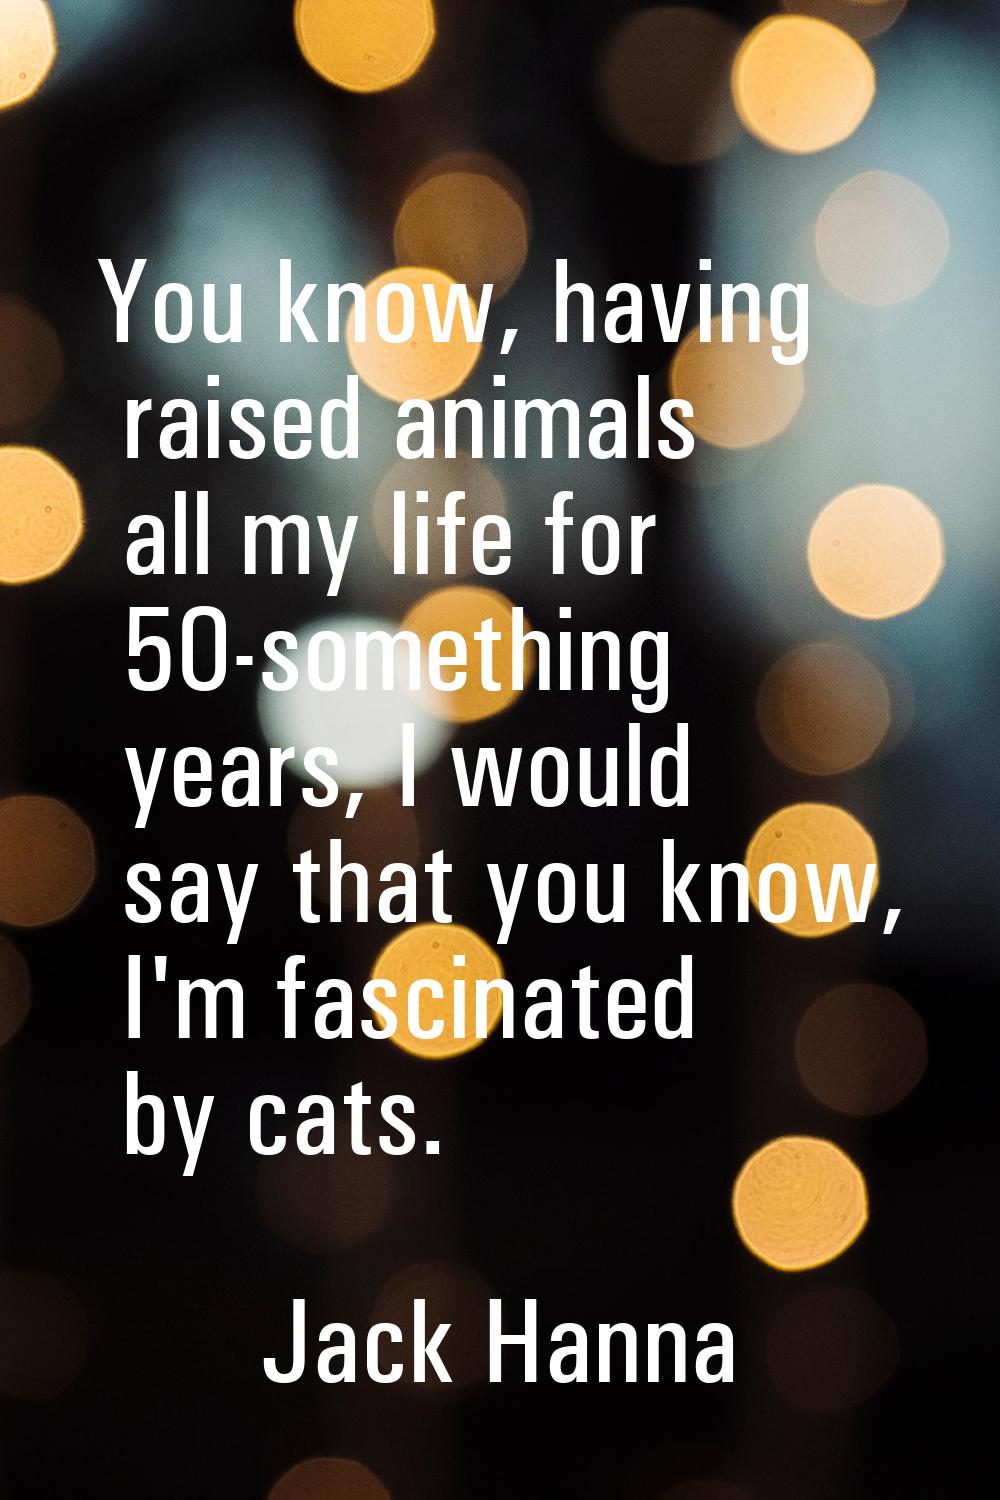 You know, having raised animals all my life for 50-something years, I would say that you know, I'm 